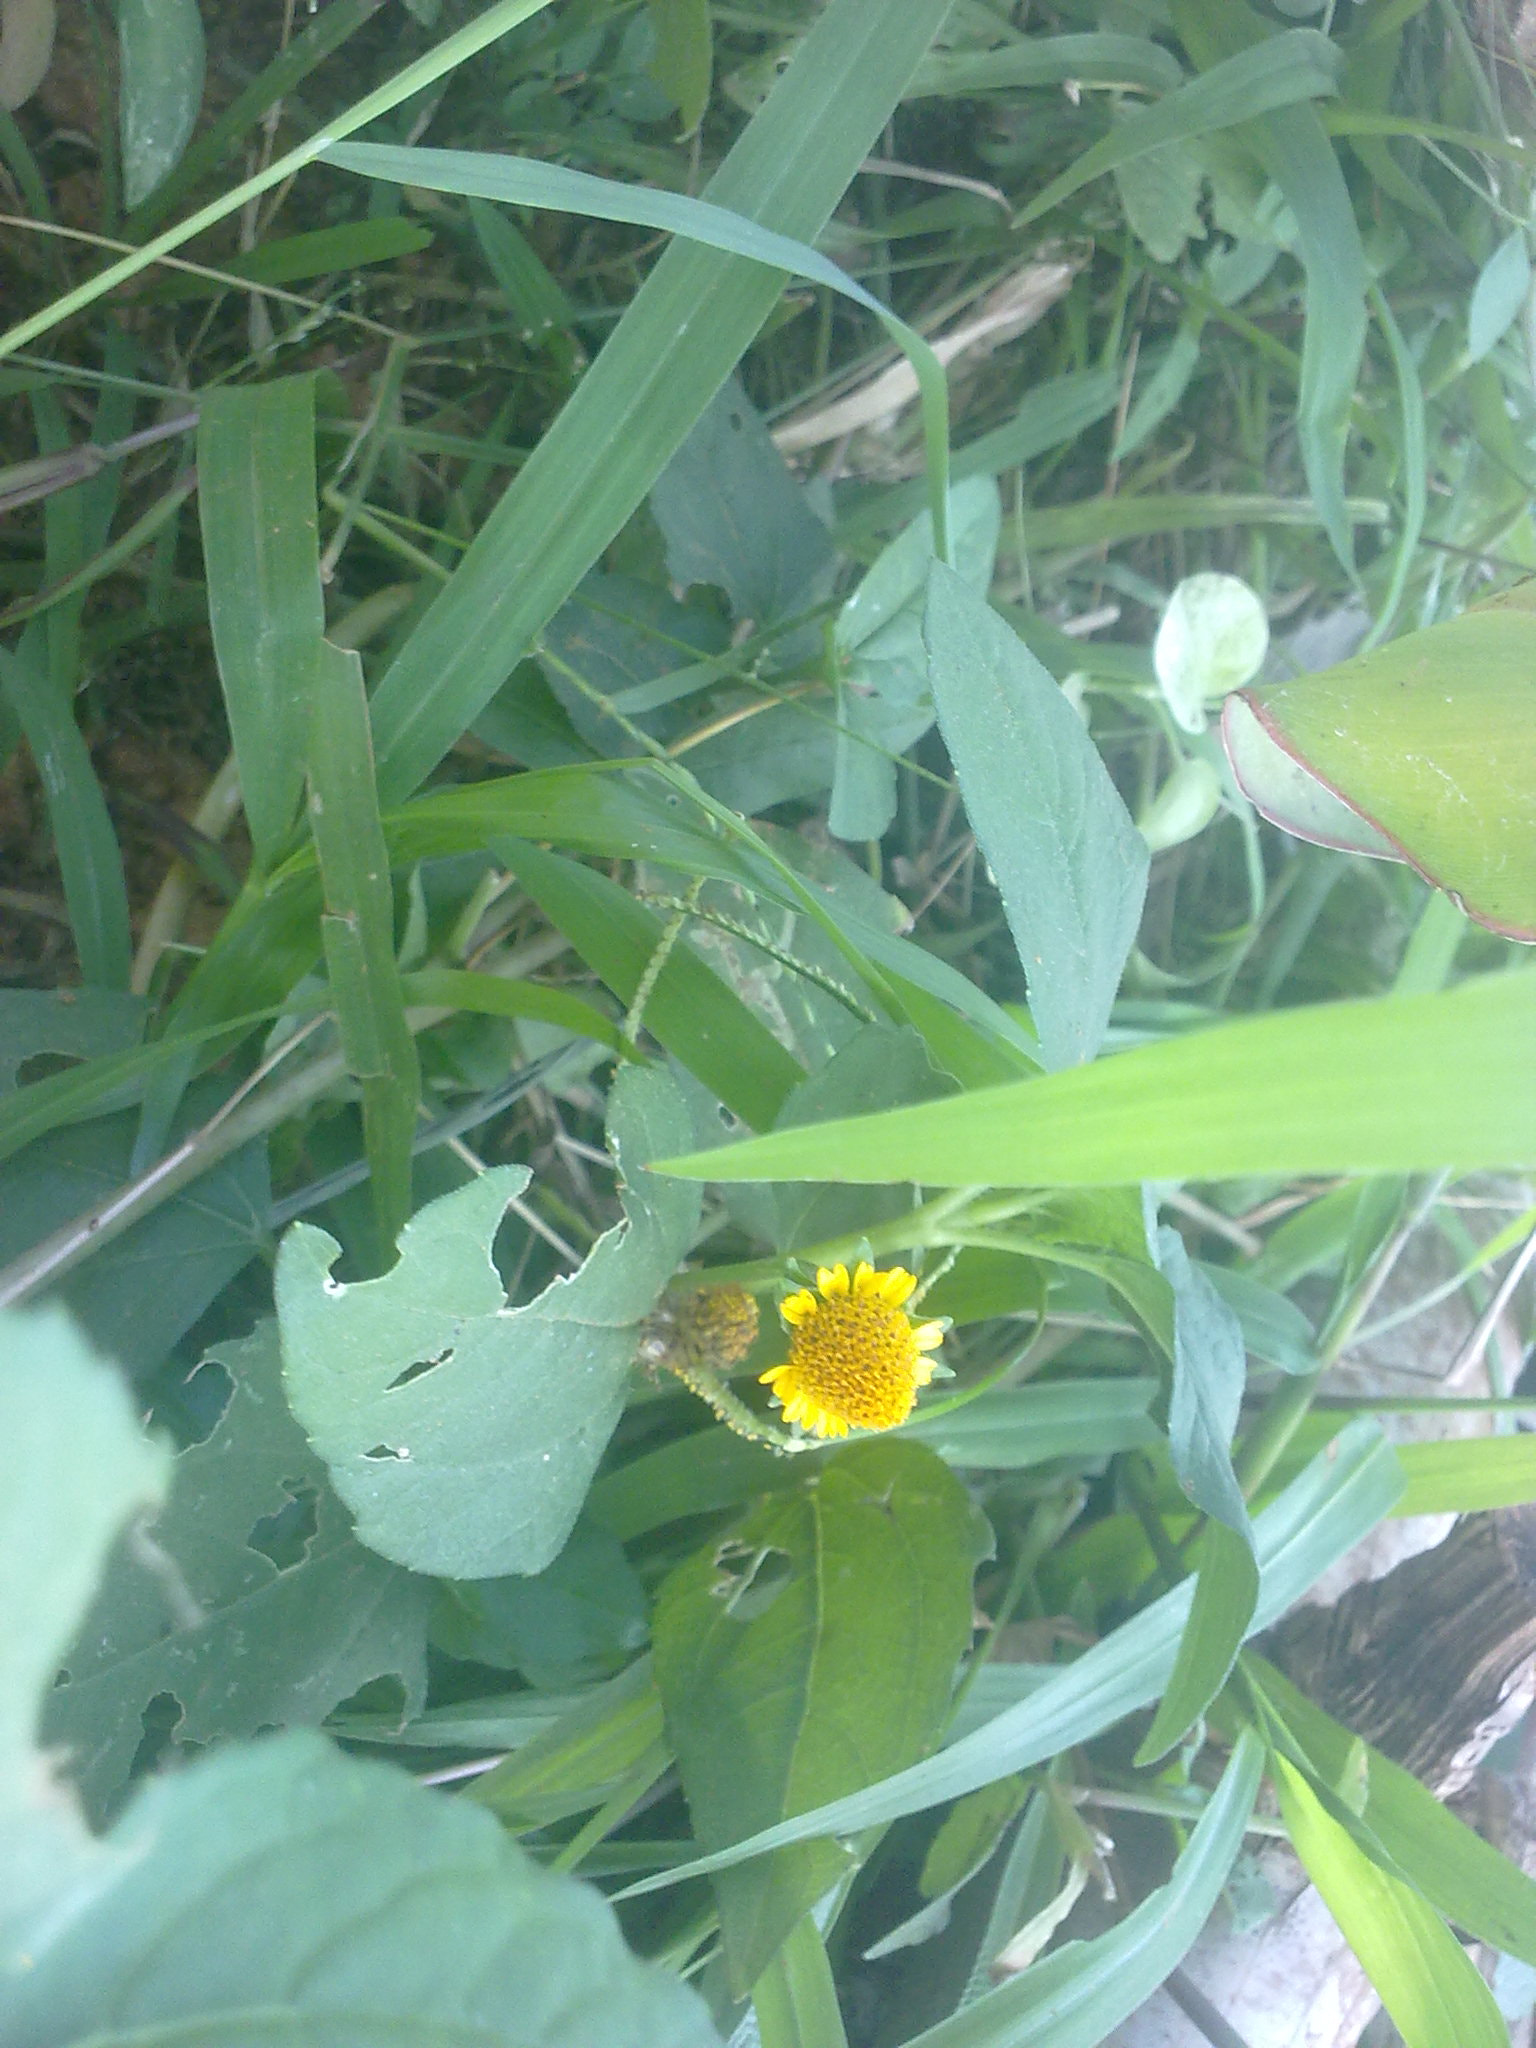 Nokia 5800 Xpres sample photo. Flowers and fruits in my pasture photography